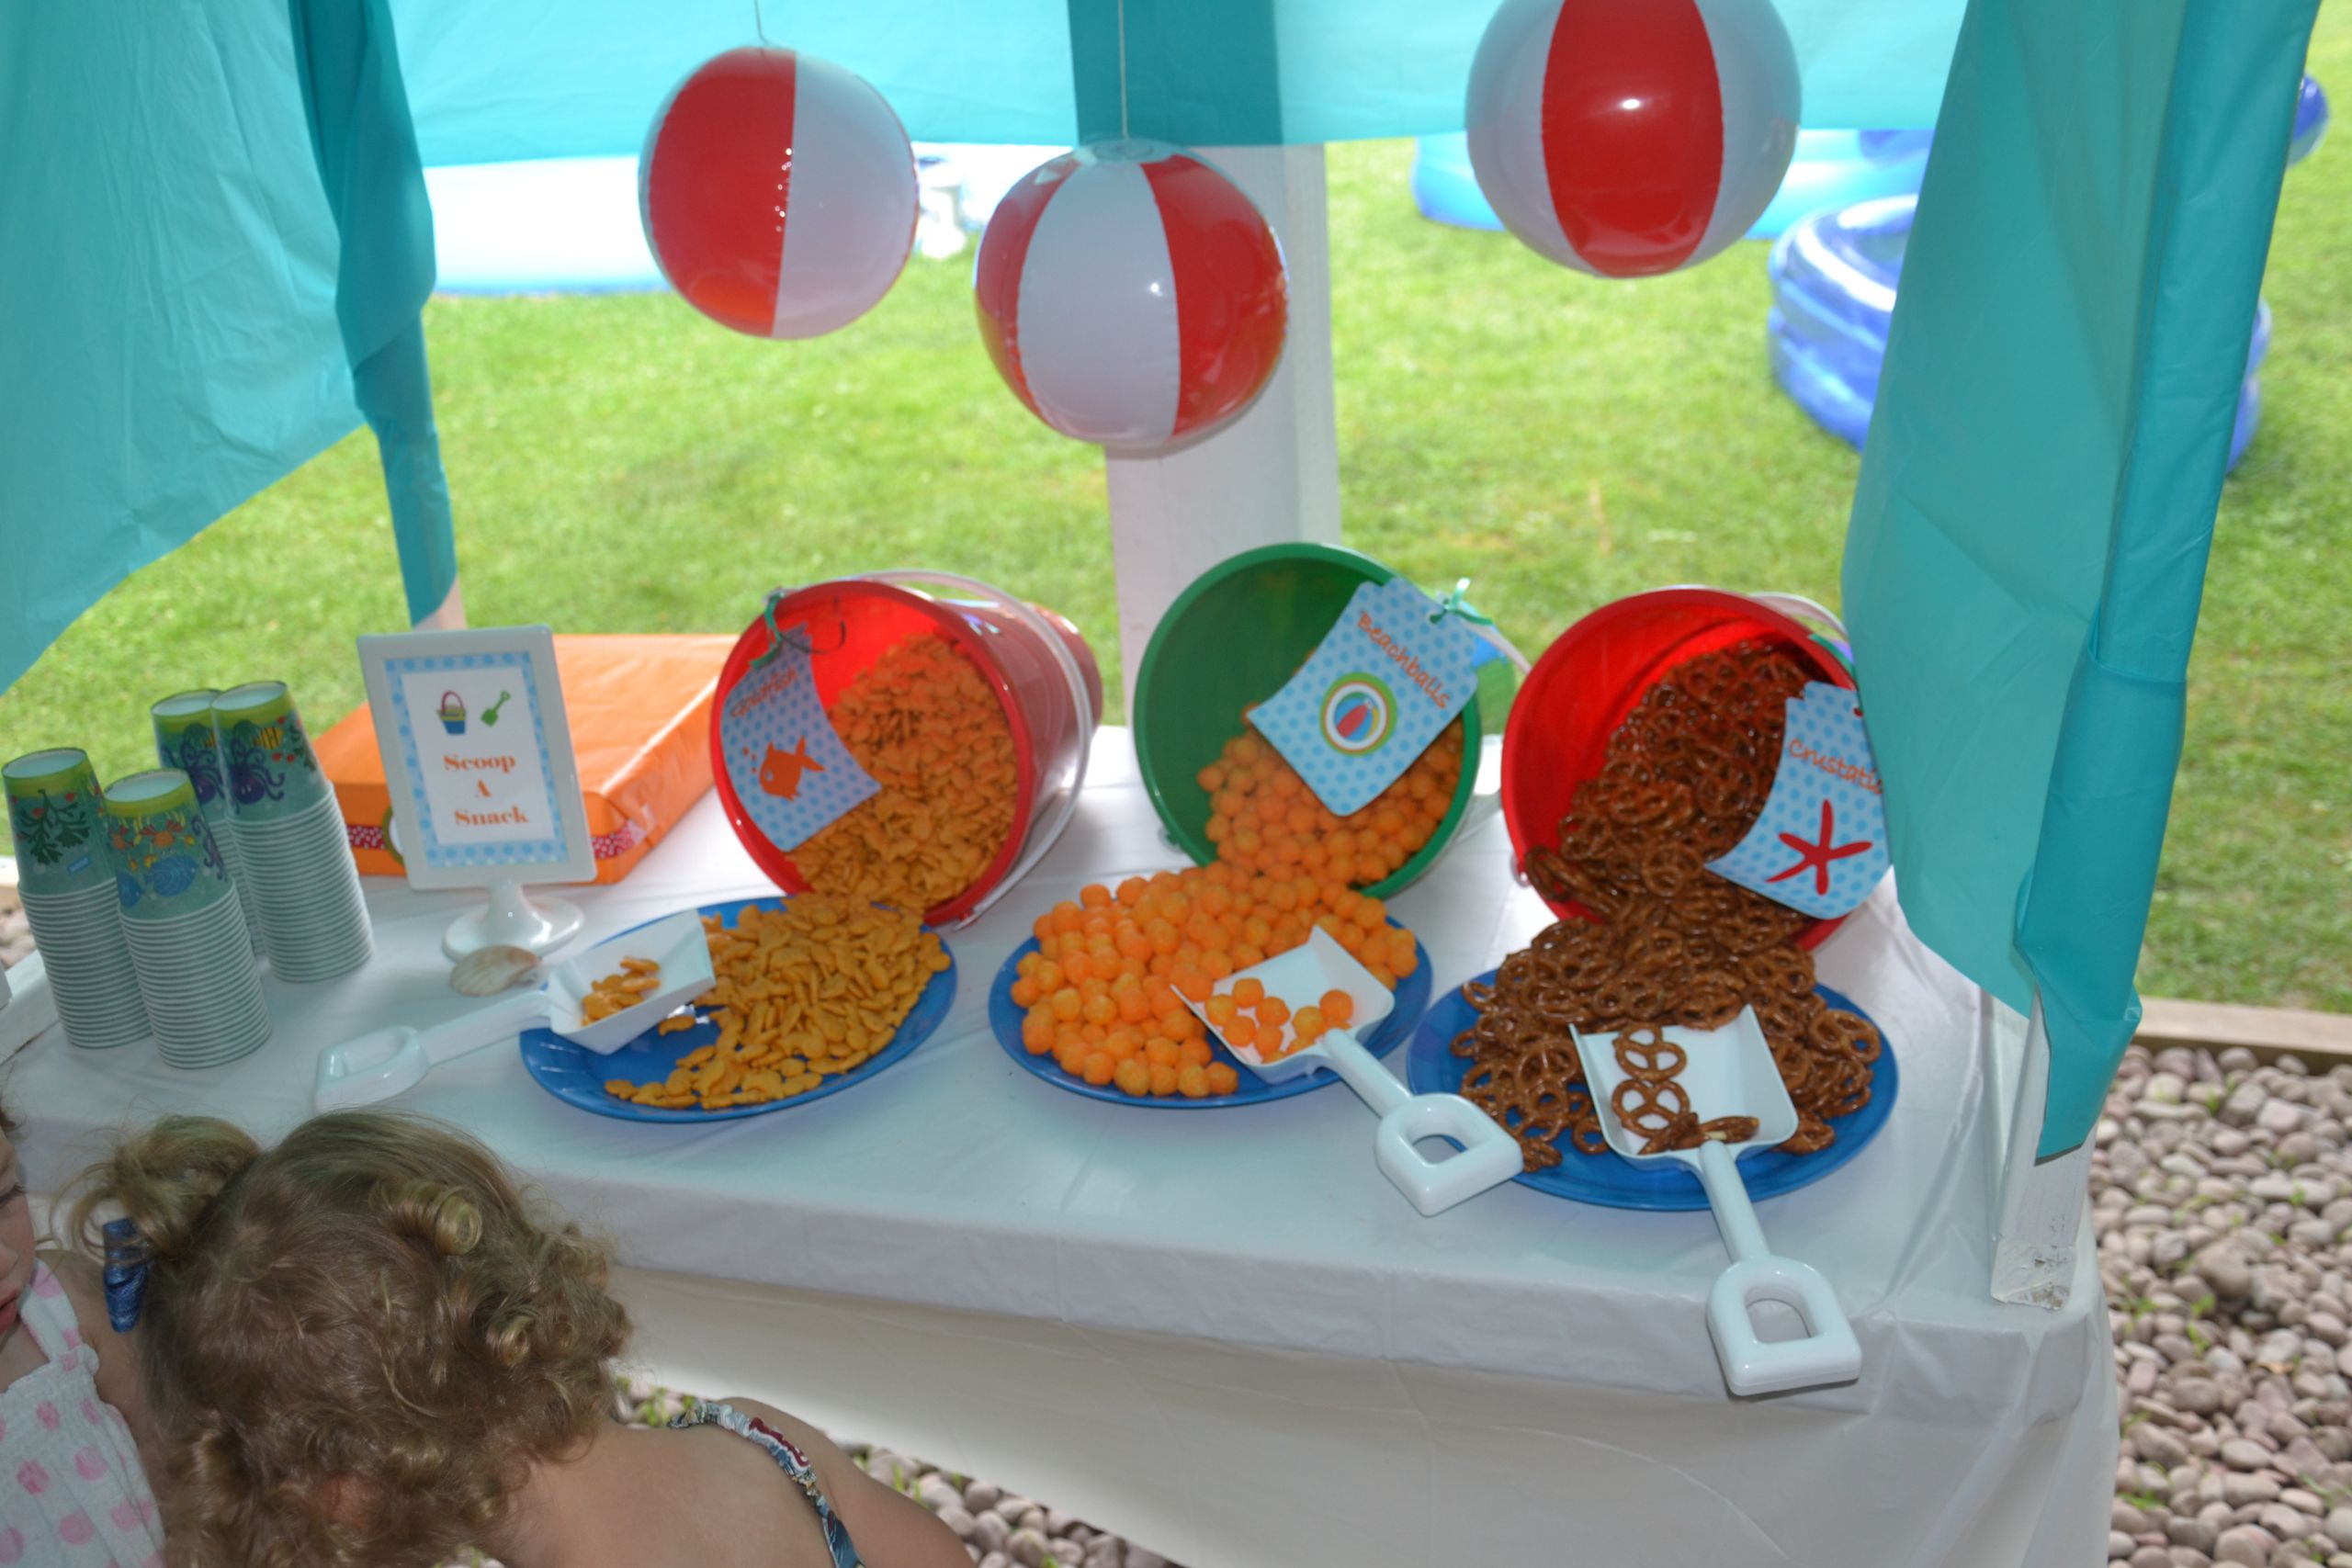 Food Ideas For A Beach Themed Party
 Party on a Bud  Ideas for Serving Summer Snacks